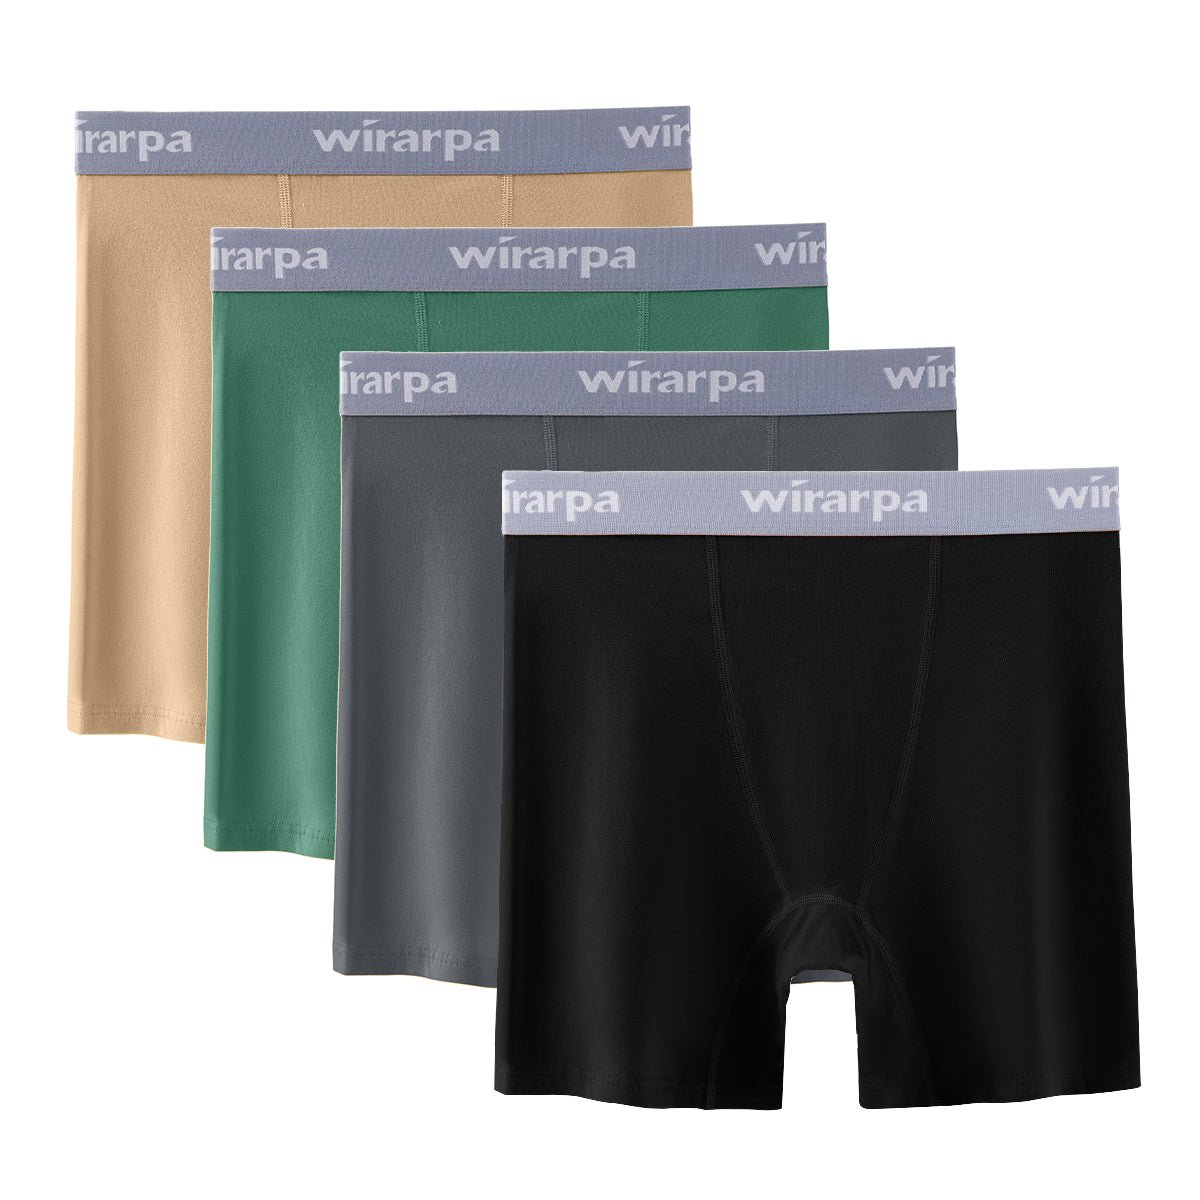  Wirarpa Womens Boxer Briefs Cotton Underwear Anti Chafing  Boy Shorts Panties 5.5 Inseam 4 Pack Multicolor Small